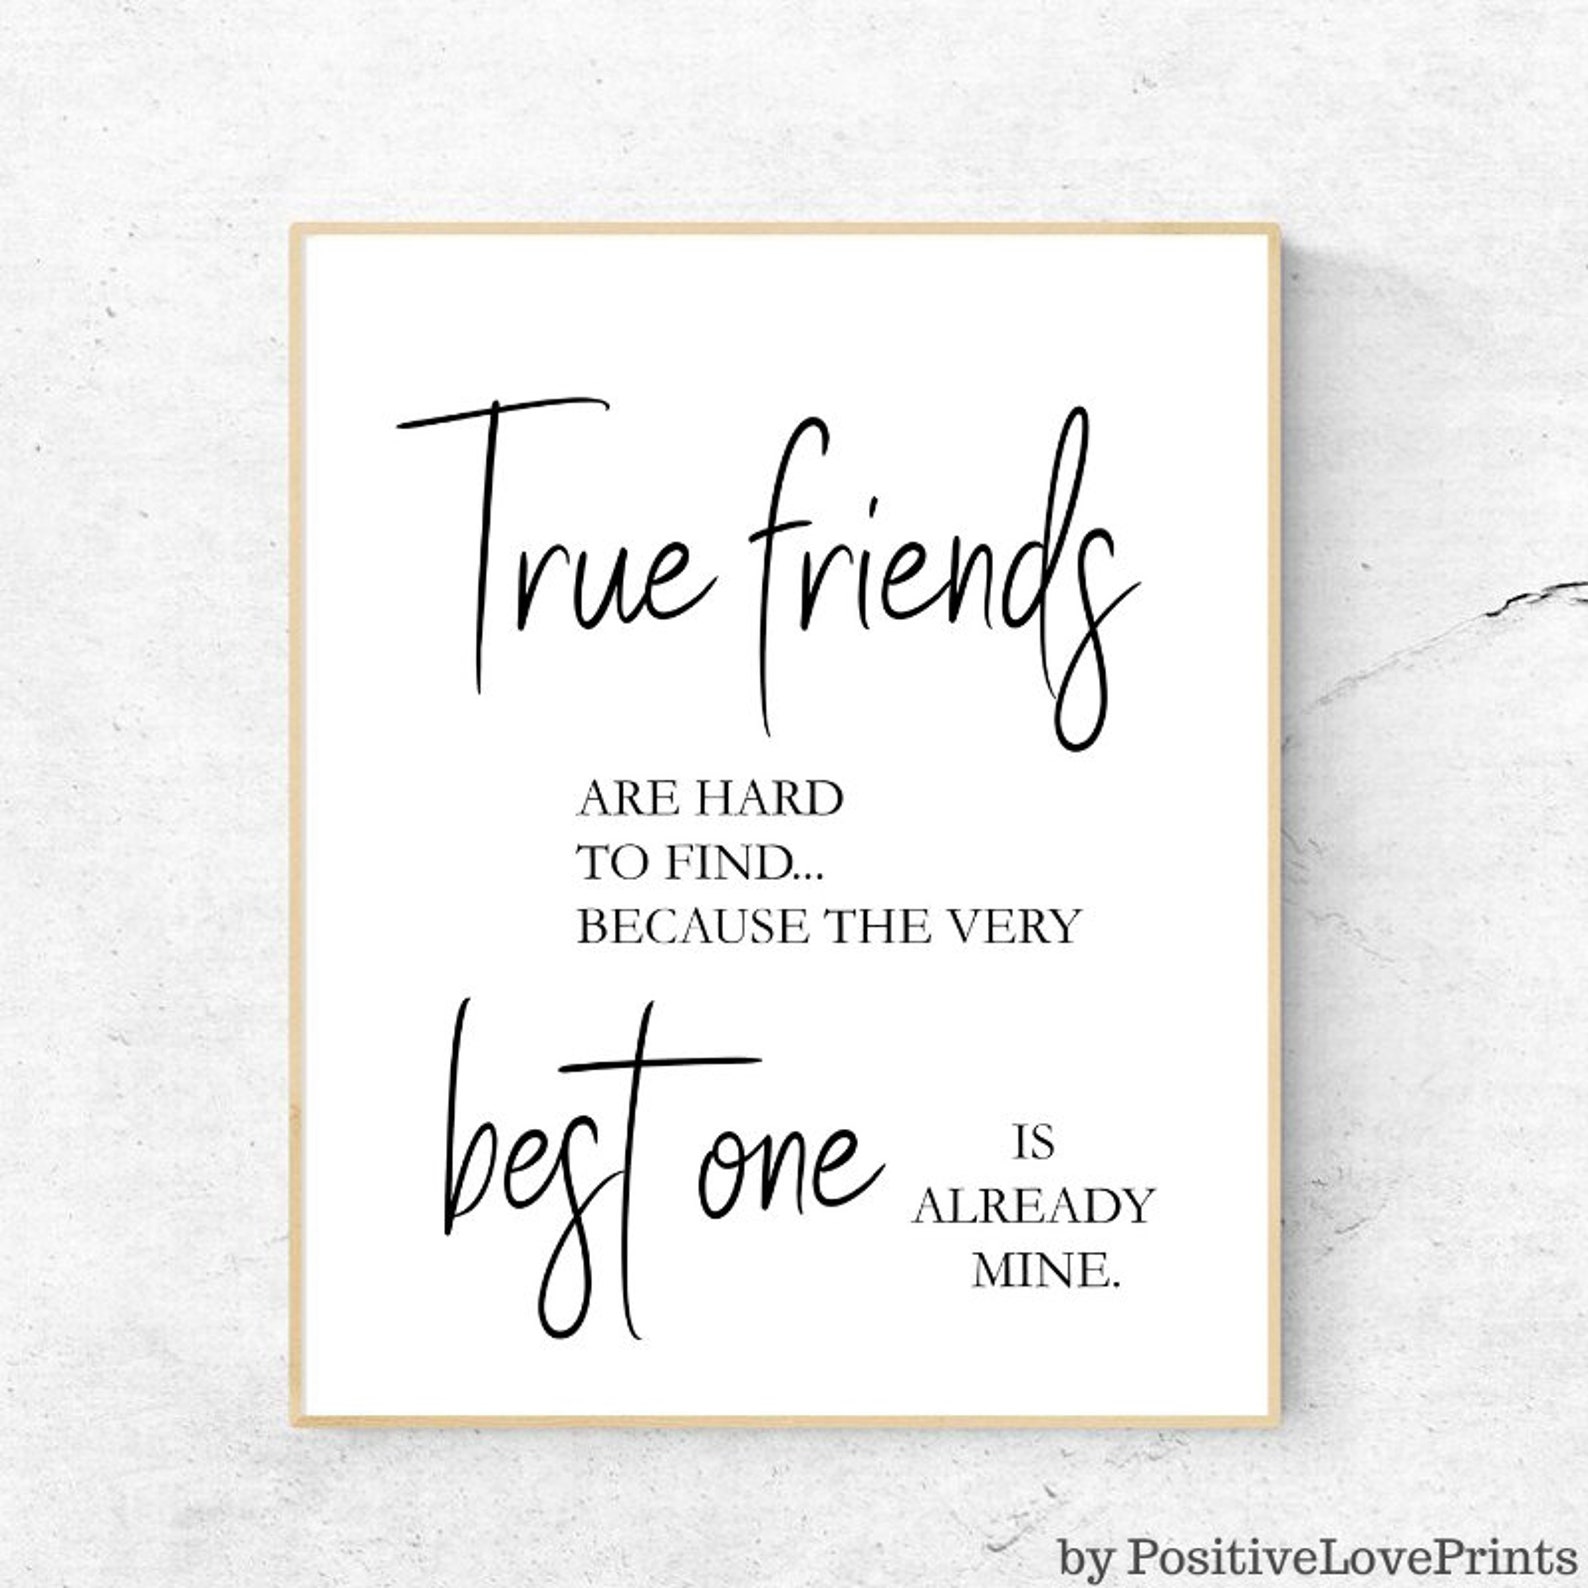 best-friend-quotes-printable-friendship-quotes-friend-wall-etsy